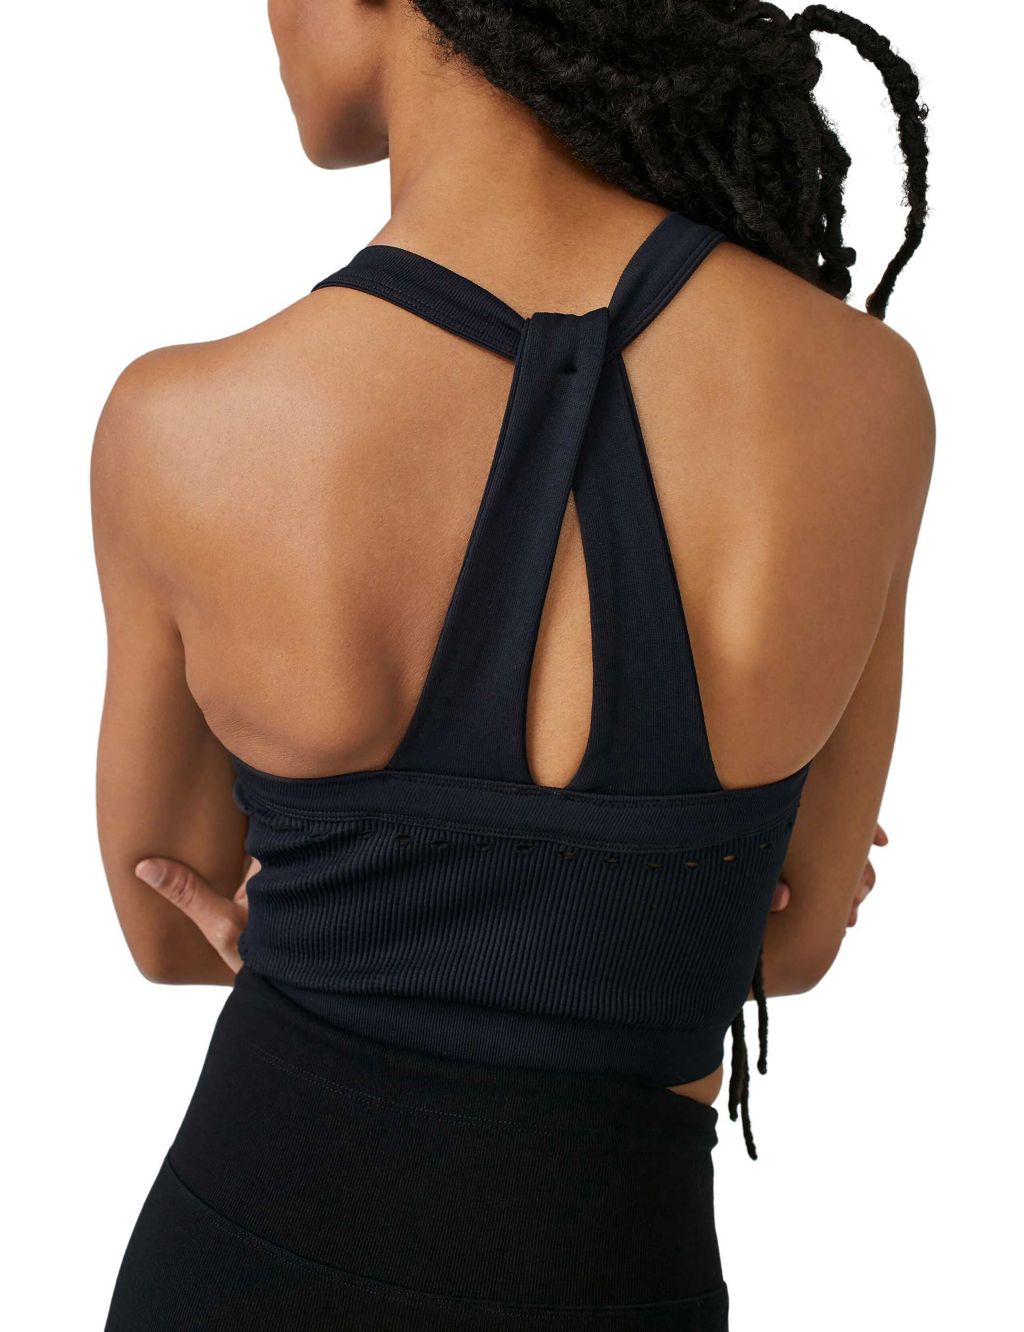 Serendipity Rib Knitted Twist Back Crop Top image 2